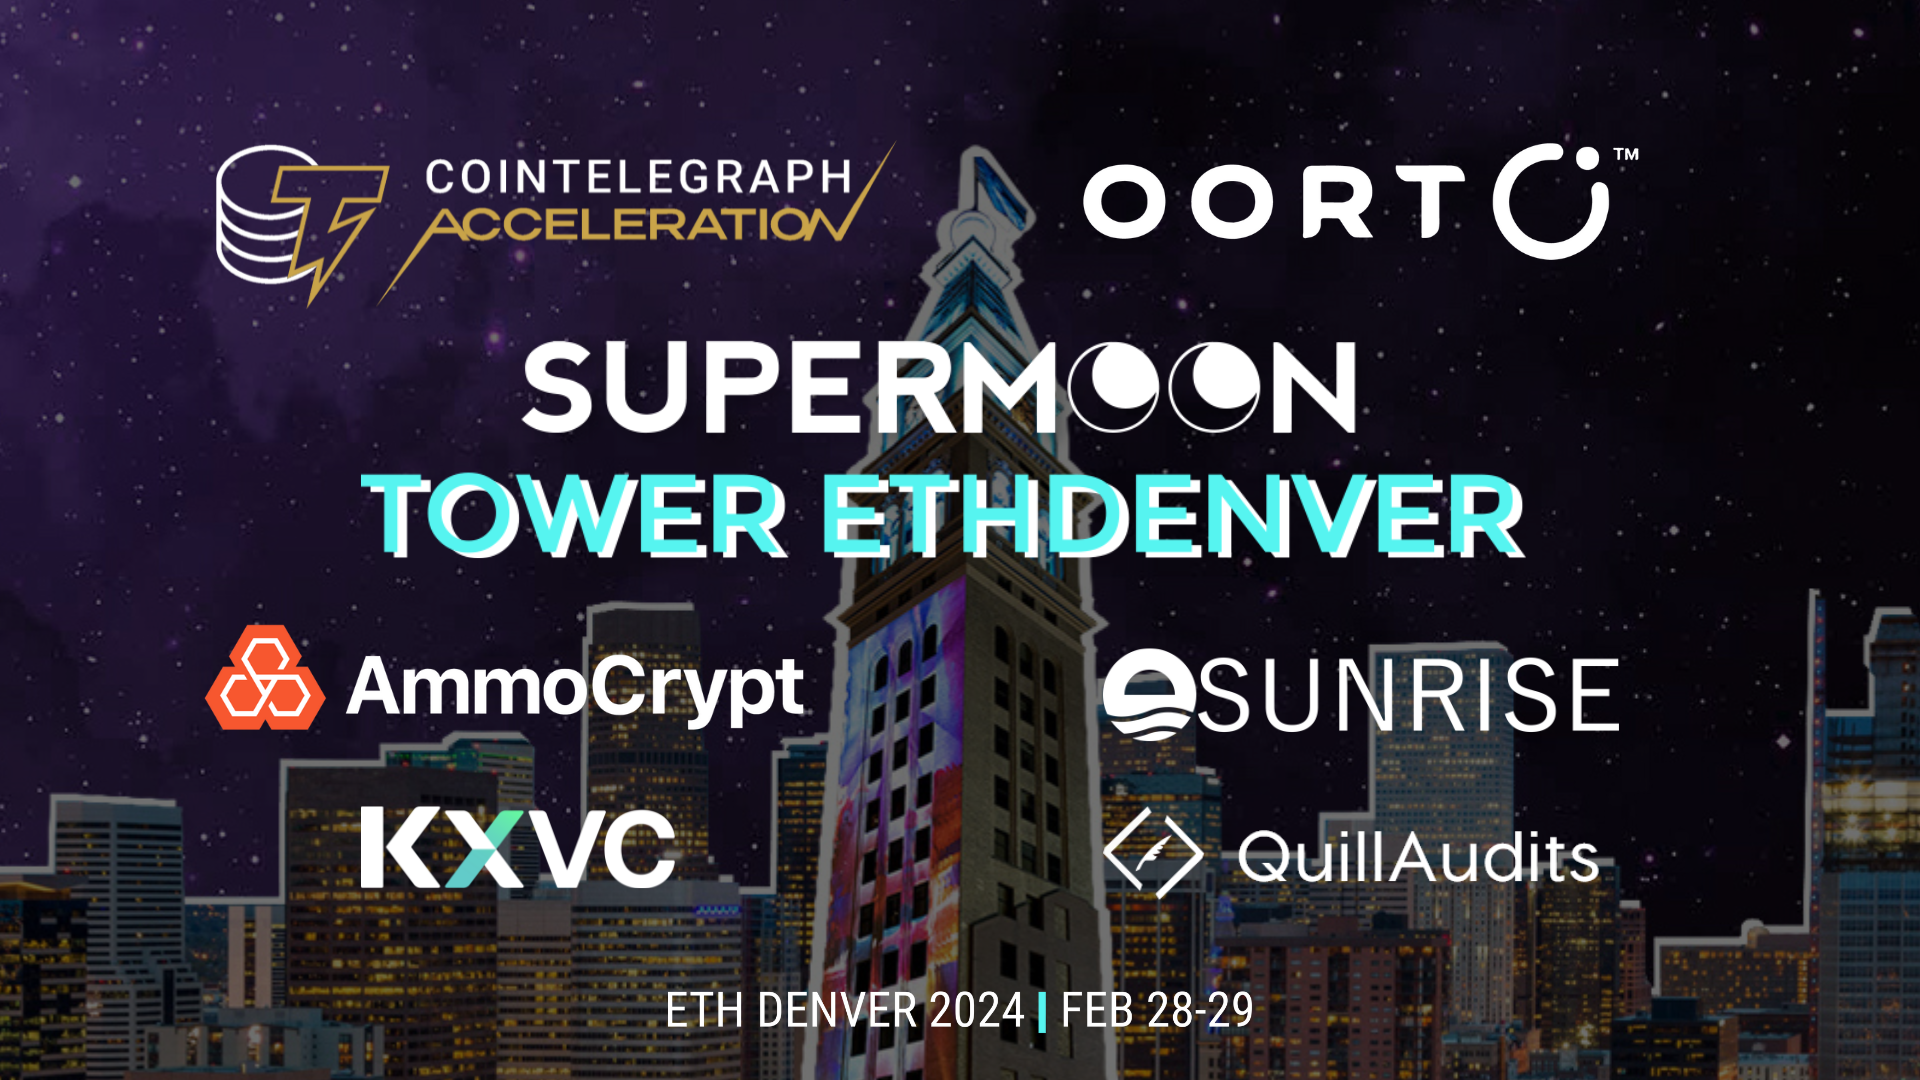 Supermoon, Cointelegraph, OORT, Sunrise, and Ammocrypt Welcomed 800+ Guests at ETH Denver